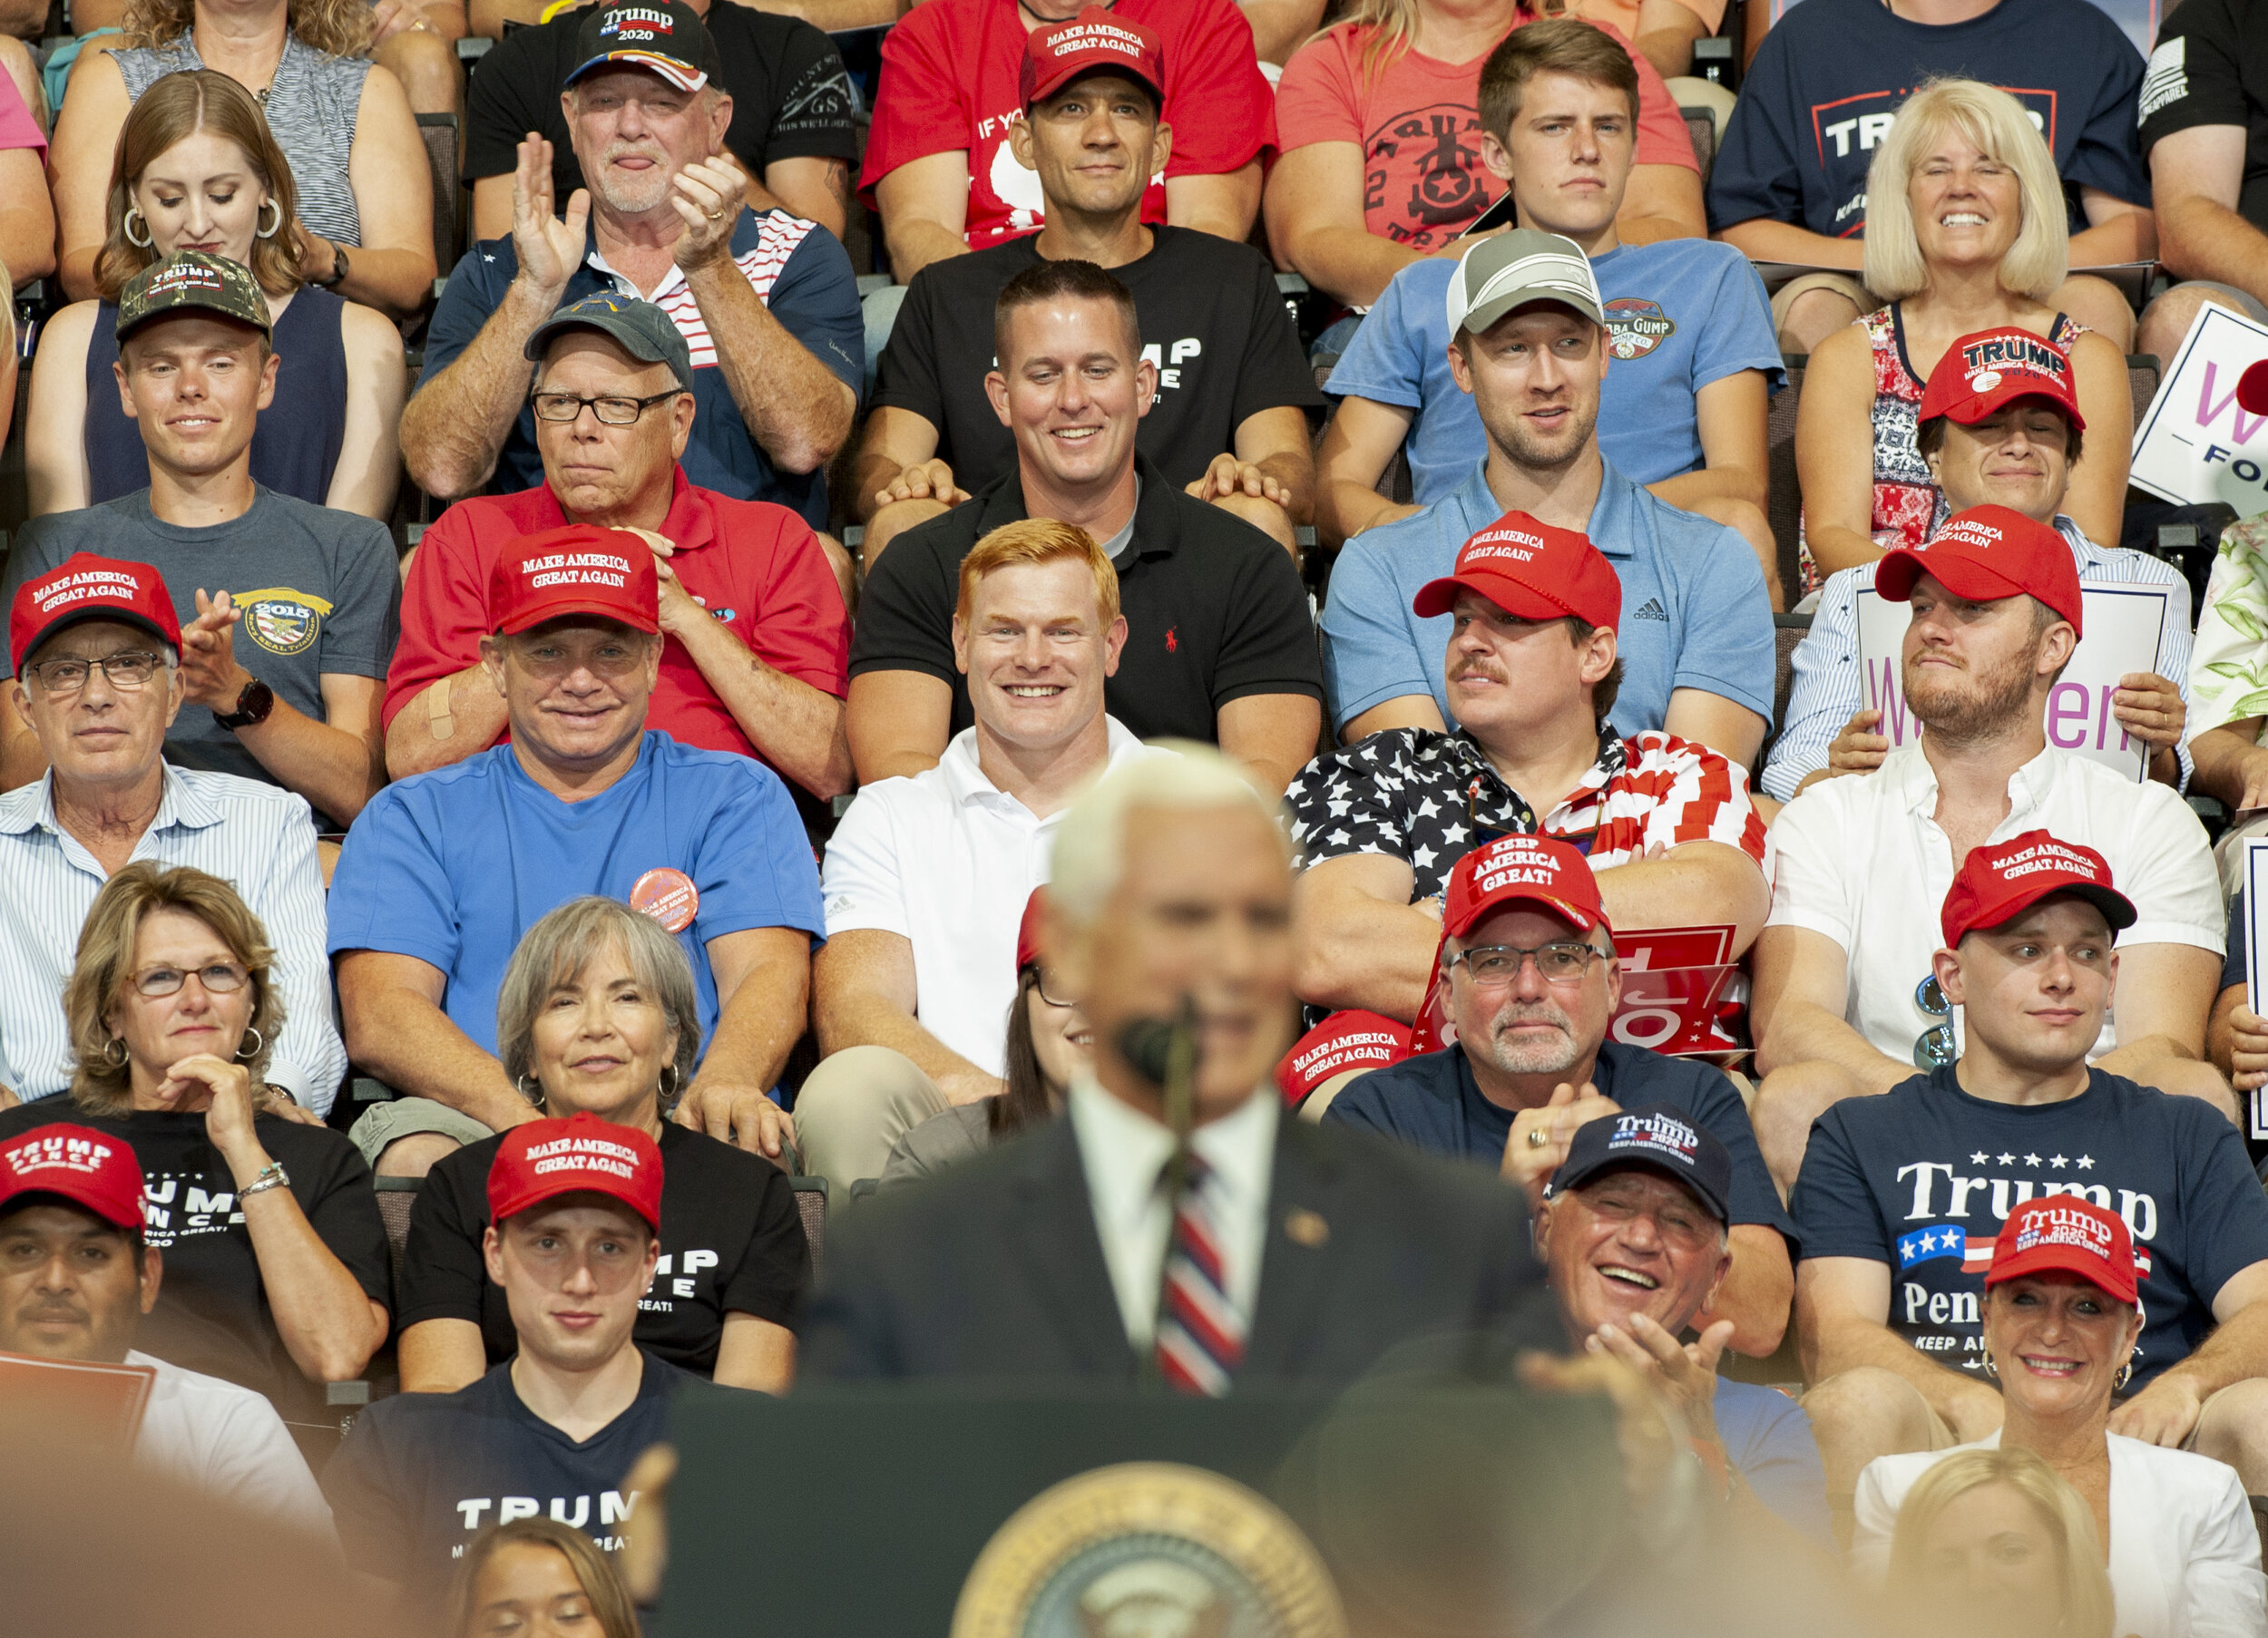  Attendees to the Trump rally in Cincinnati, Ohio listen to a speech by Vice President Mike Pence on August 1, 2019. 